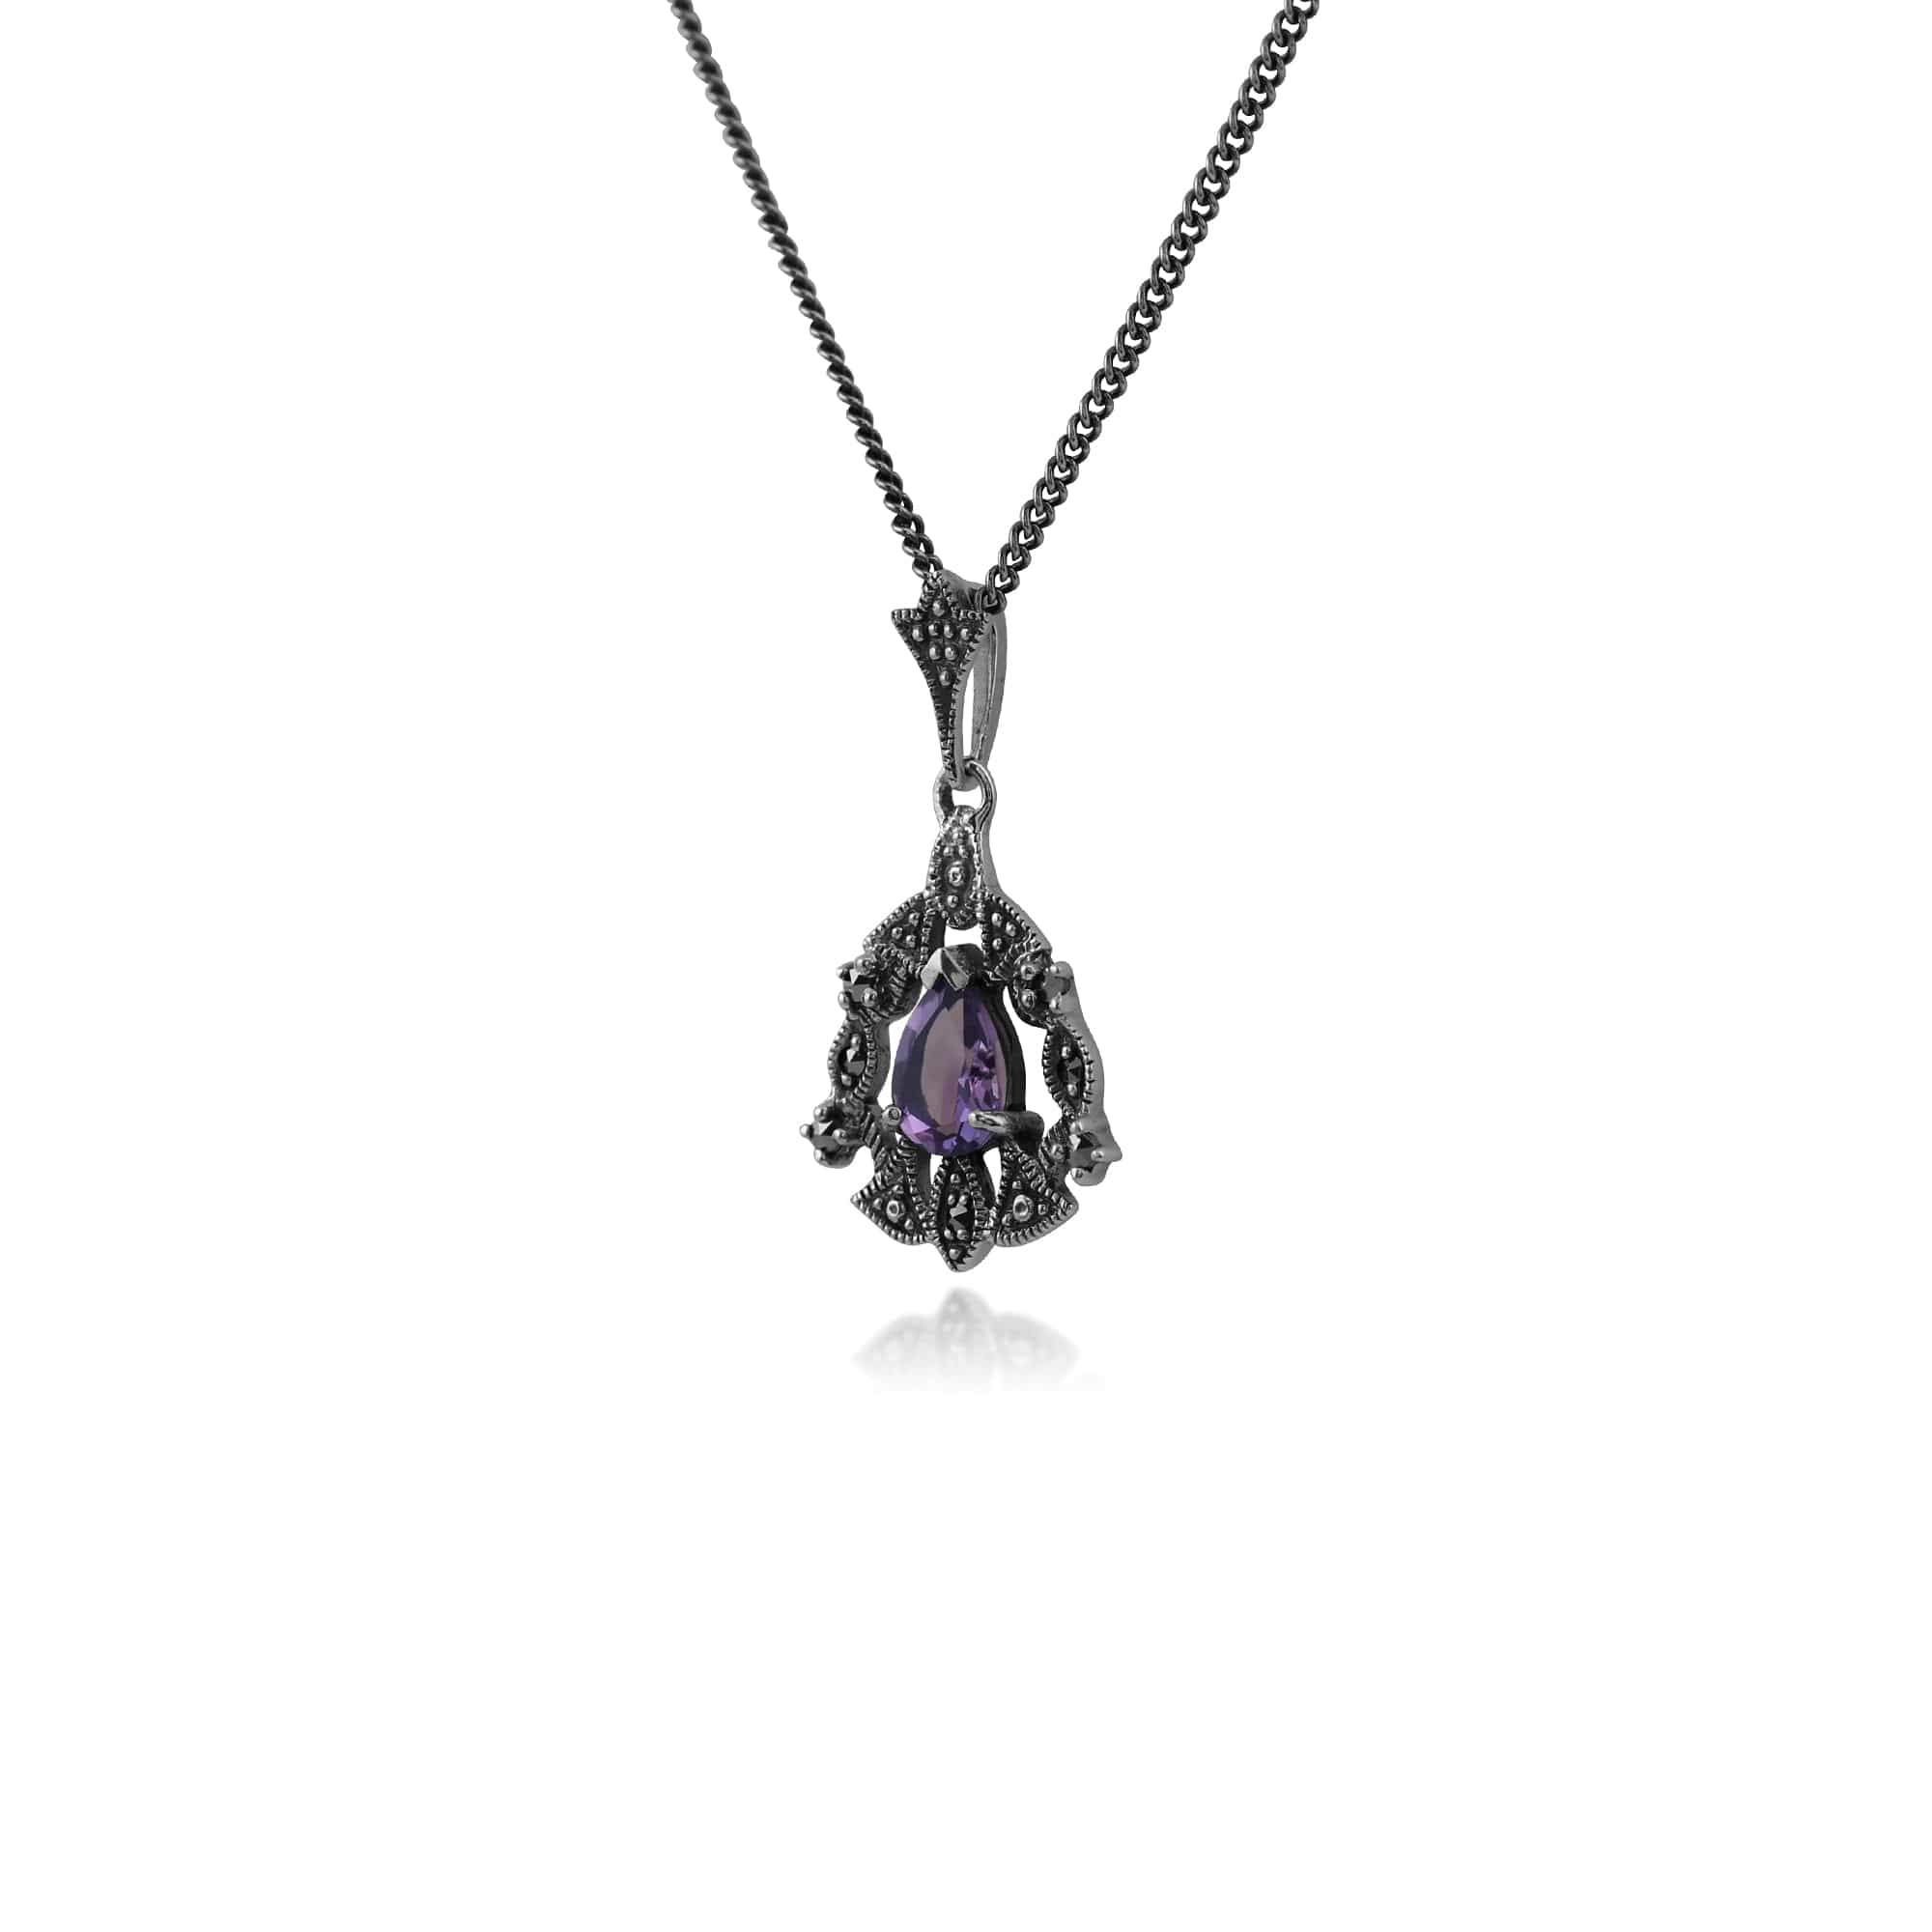 214N540202925 Art Nouveau Style Pear Amethyst & Marcasite Garland Necklace in 925 Sterling Silver 2